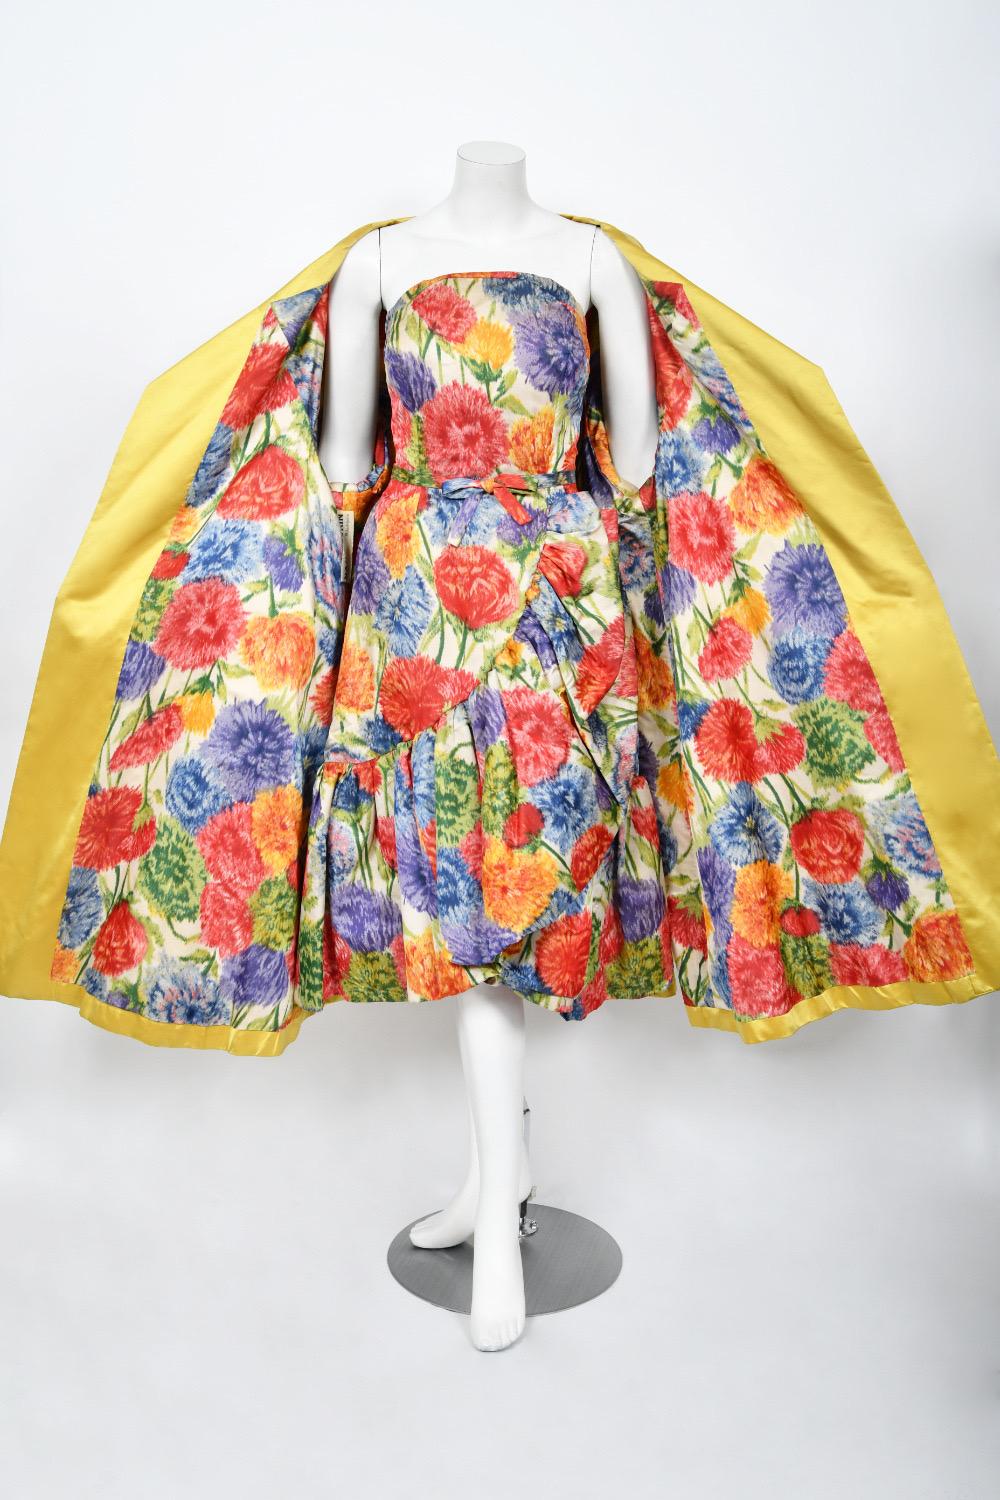 1950s Arnold Scaasi Couture Colorful Floral Silk Strapless Dress & Swing Jacket  4